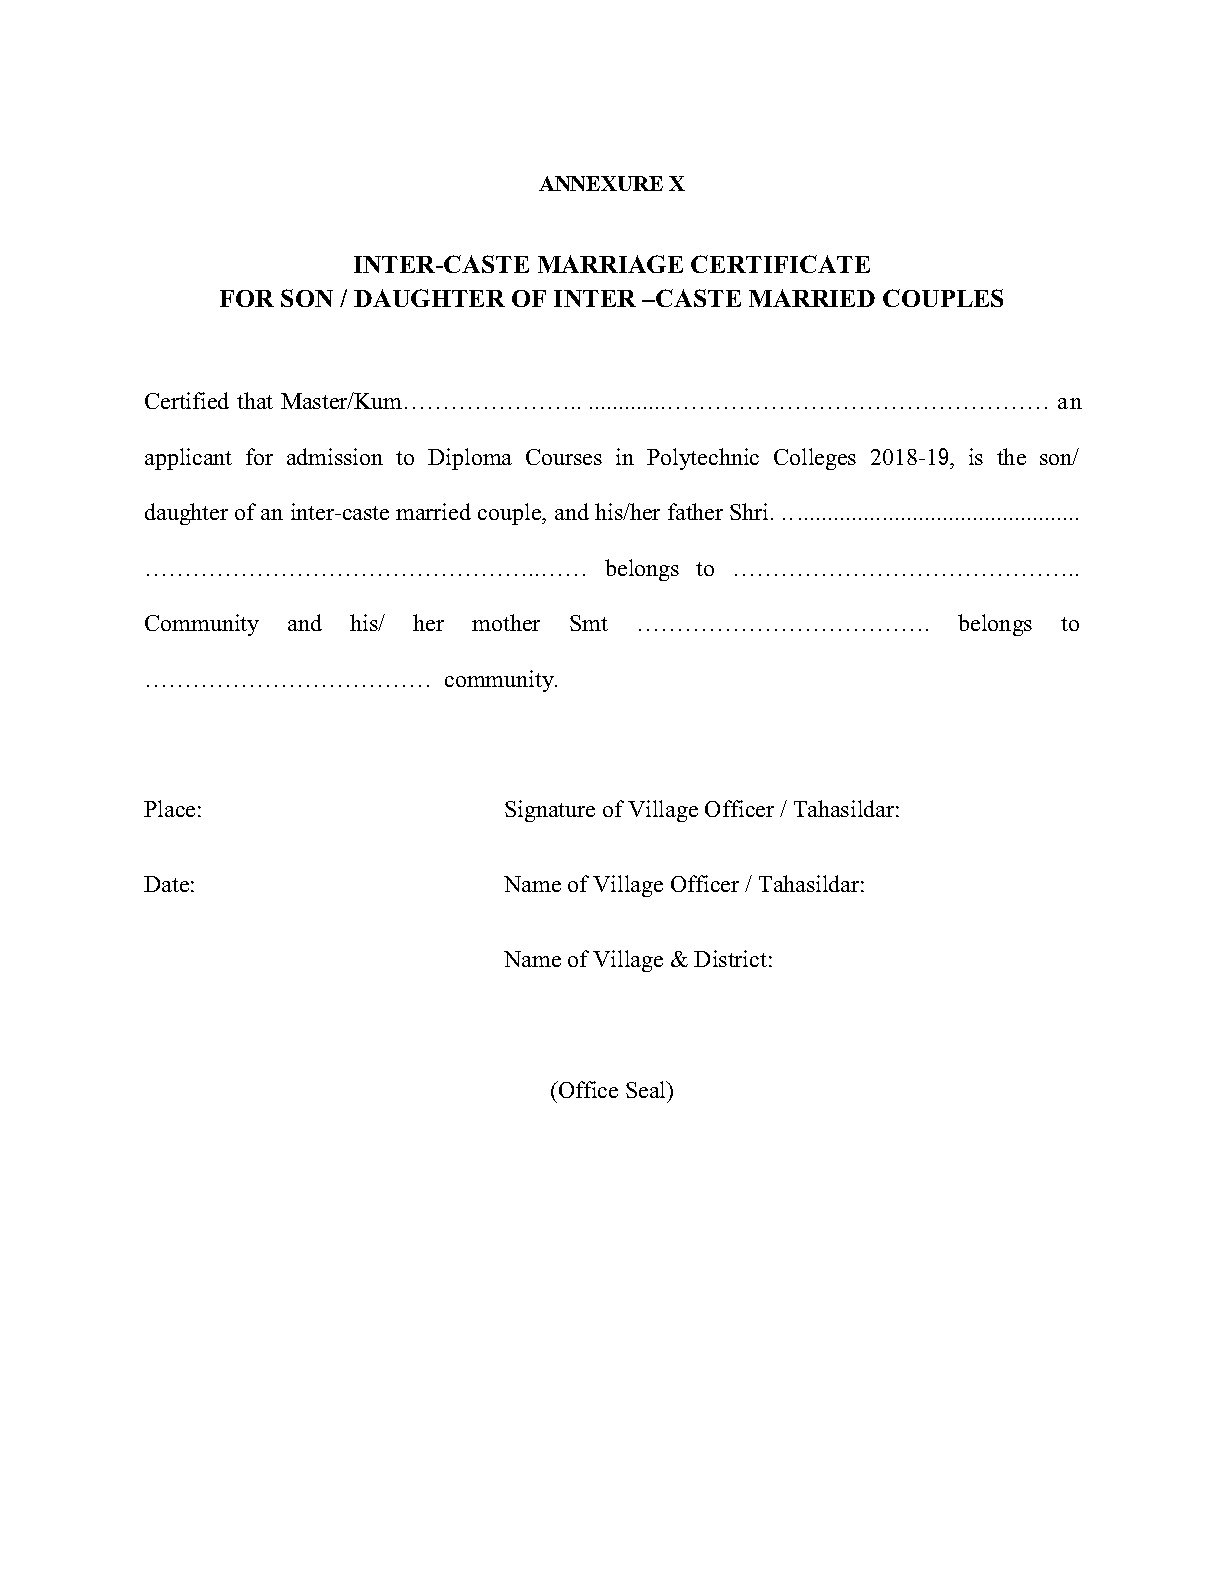 Inter Caste Marriage Certificate for Children of Inter Caste Married Couples - Notification Image 1